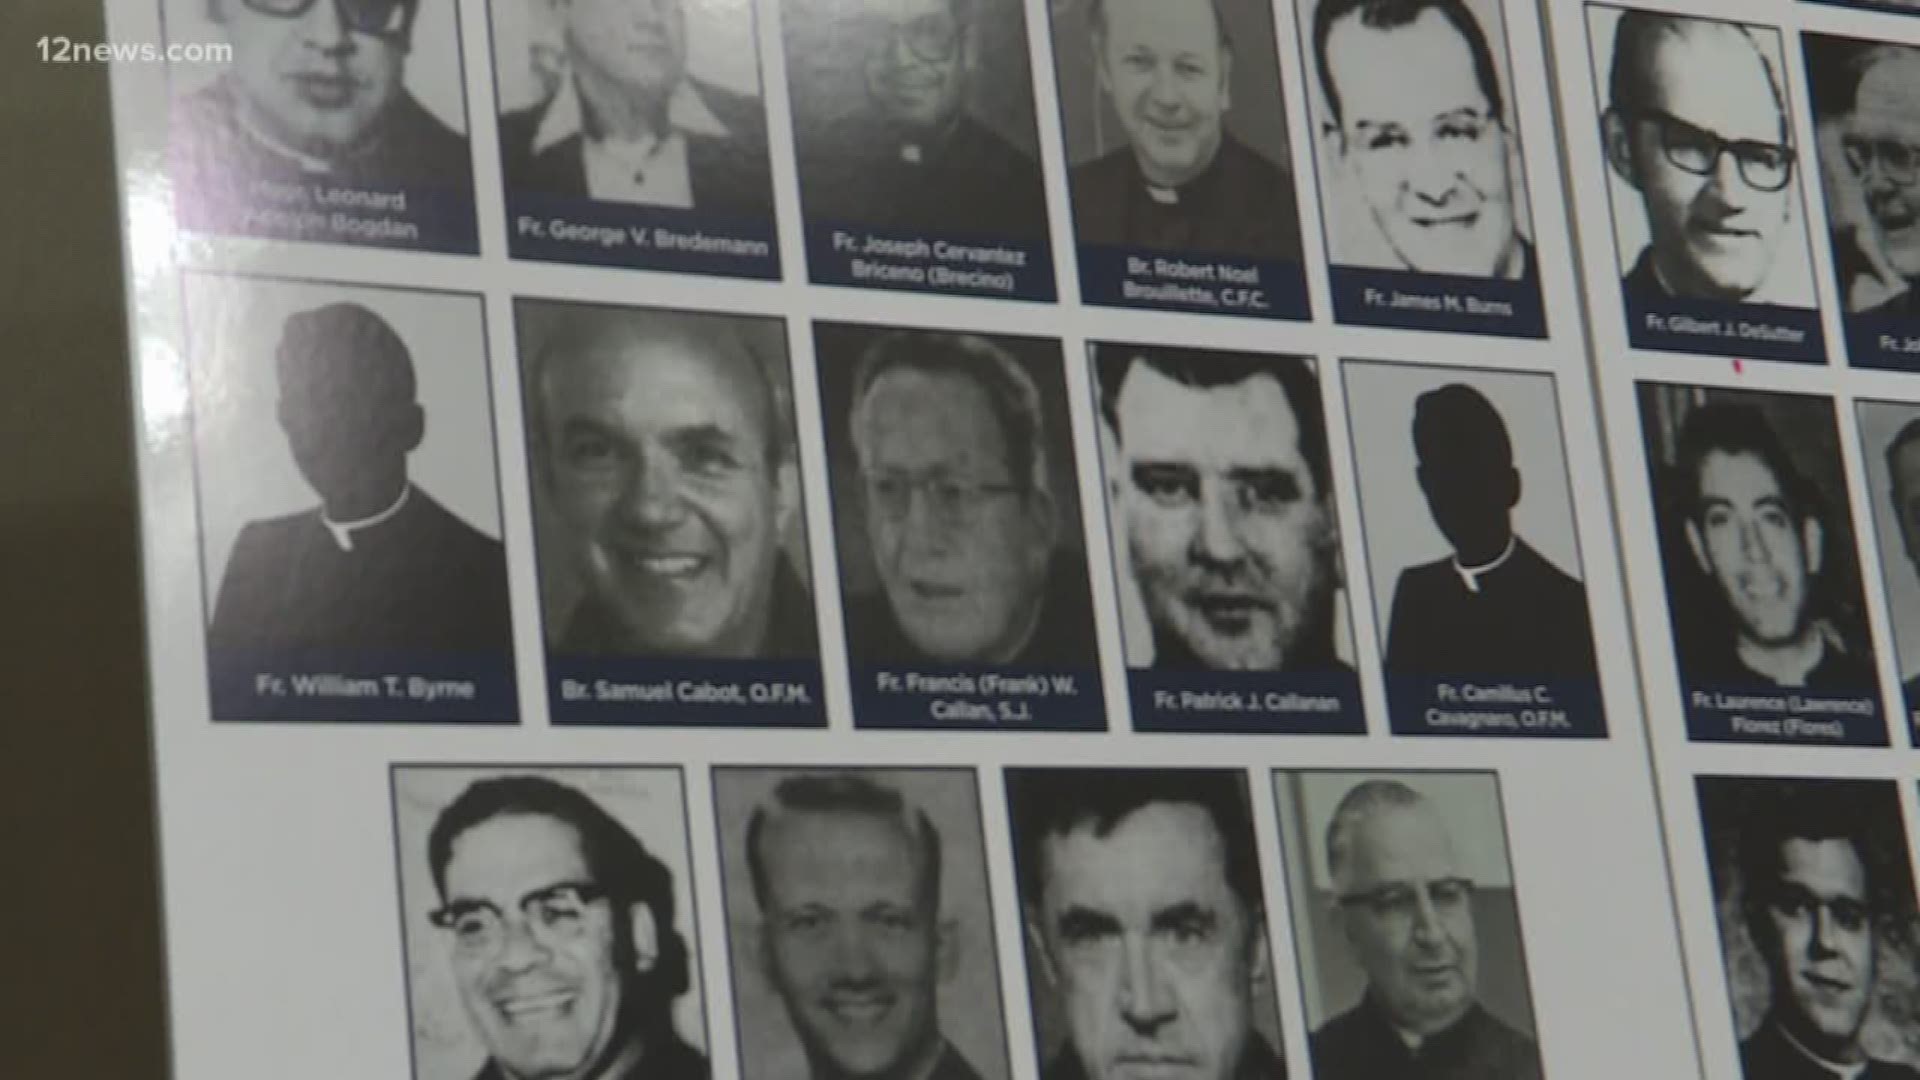 A Minnesota-based law firm has published what it says is the most comprehensive list of credible sex abusers linked to the Phoenix Catholic Diocese. The list contains 109 names. Attorneys and advocates are asking for victims to come forward.